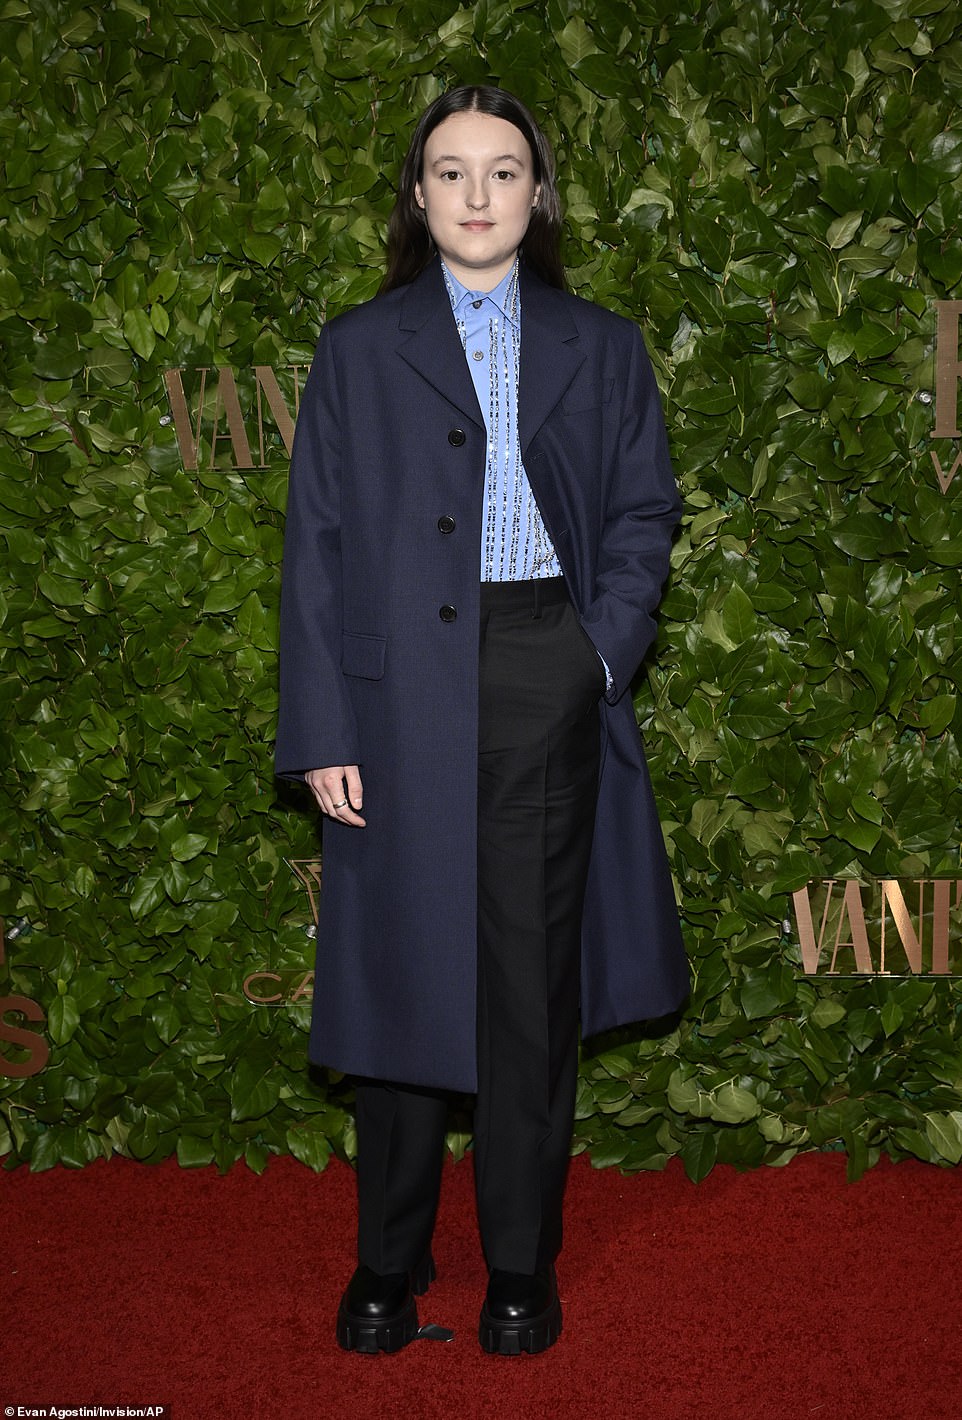 Nominee: Bella Ramsey, who identifies as non-binary and uses they/them pronouns, wore a long navy coat over a blue button-down, tucked into a pair of black trousers